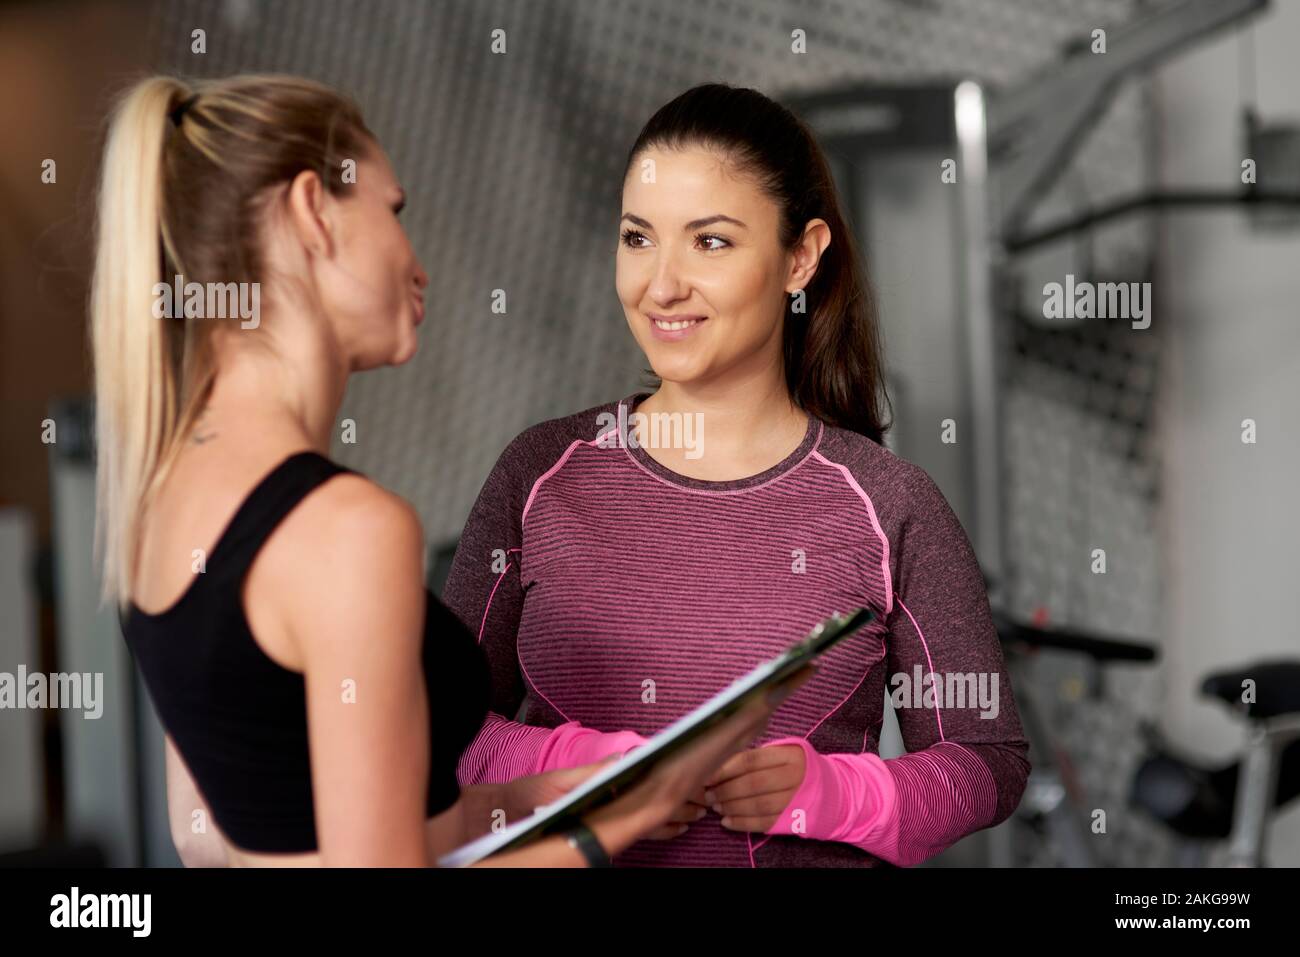 Personal trainer guding young woman at gym Stock Photo